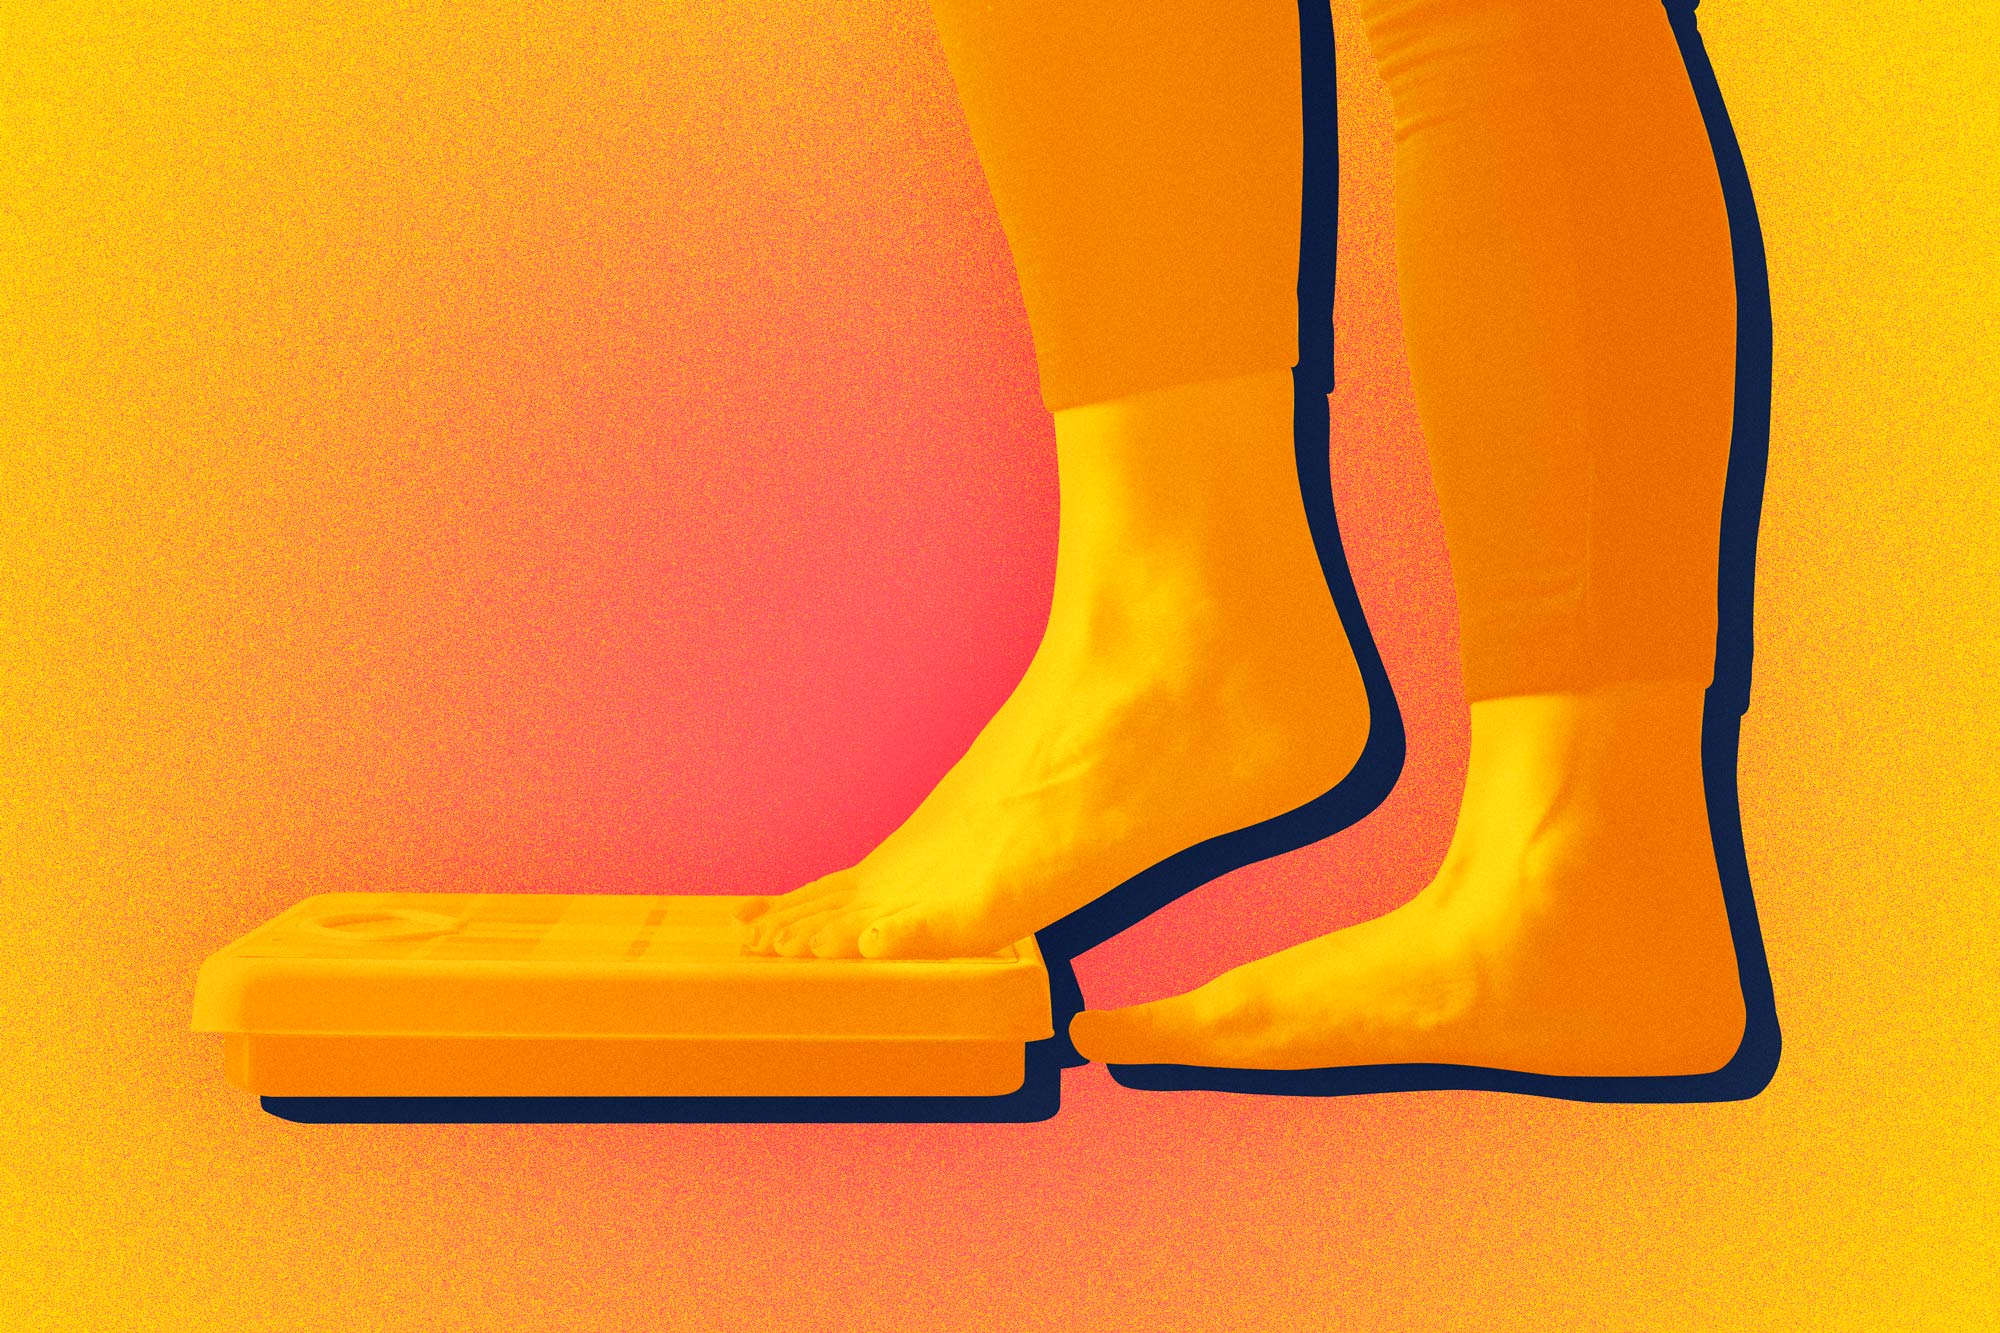 Orange and Red image of a persons legs with one foot stepping onto a weight scale and one foot on the floor